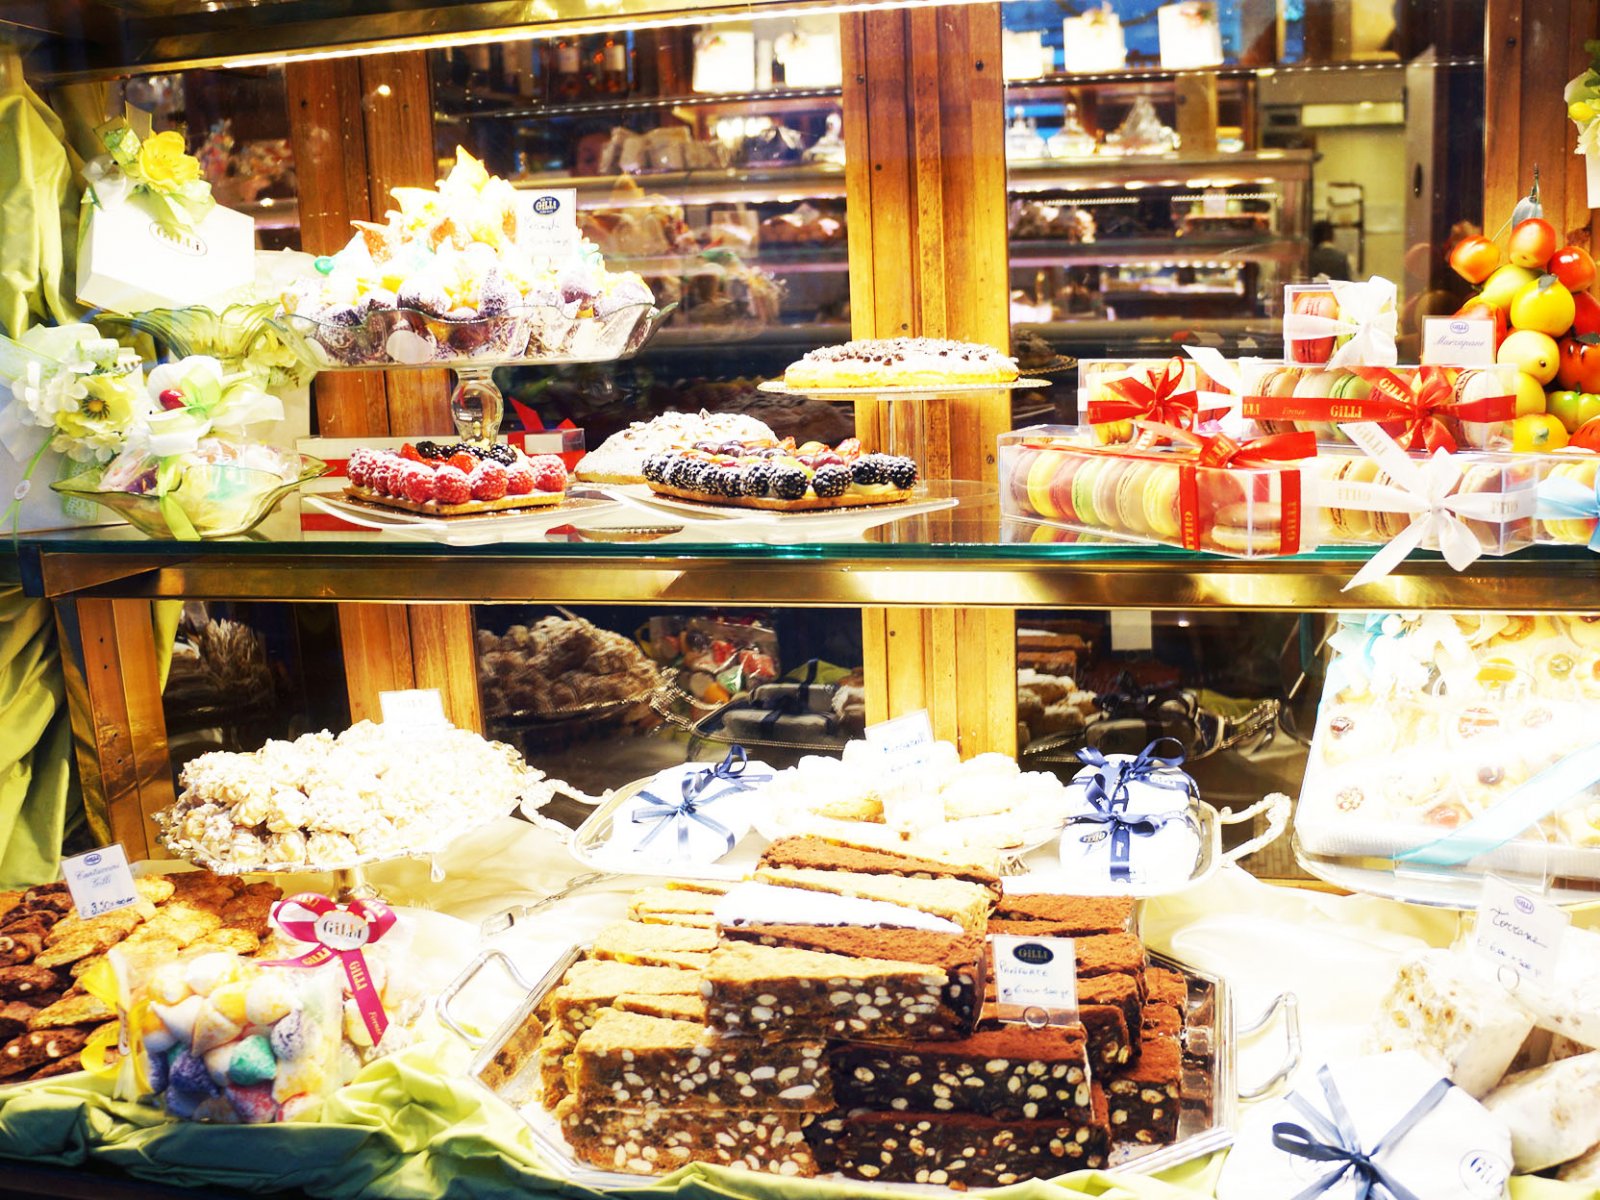 How to taste chocolate in Gilli confectioner's shop in Florence